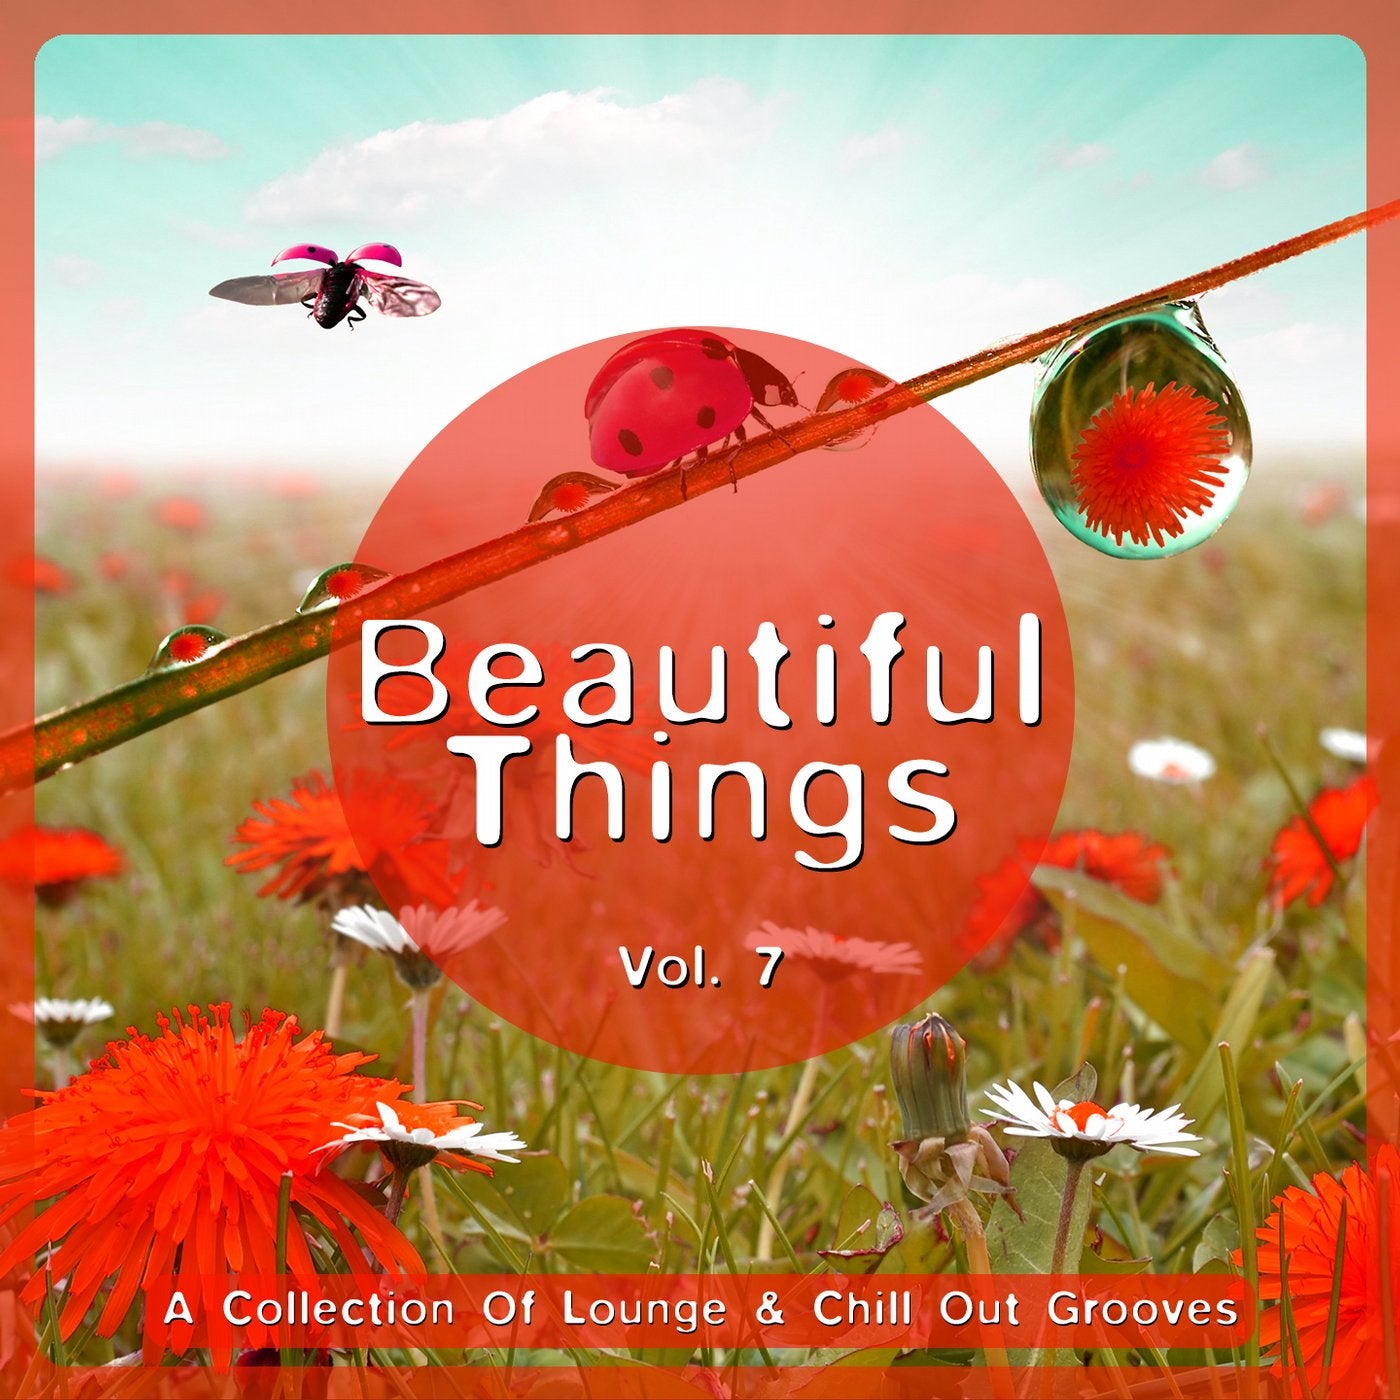 Beautiful Things Vol. 7 (A Collection Of Lounge & Chill Out Grooves)